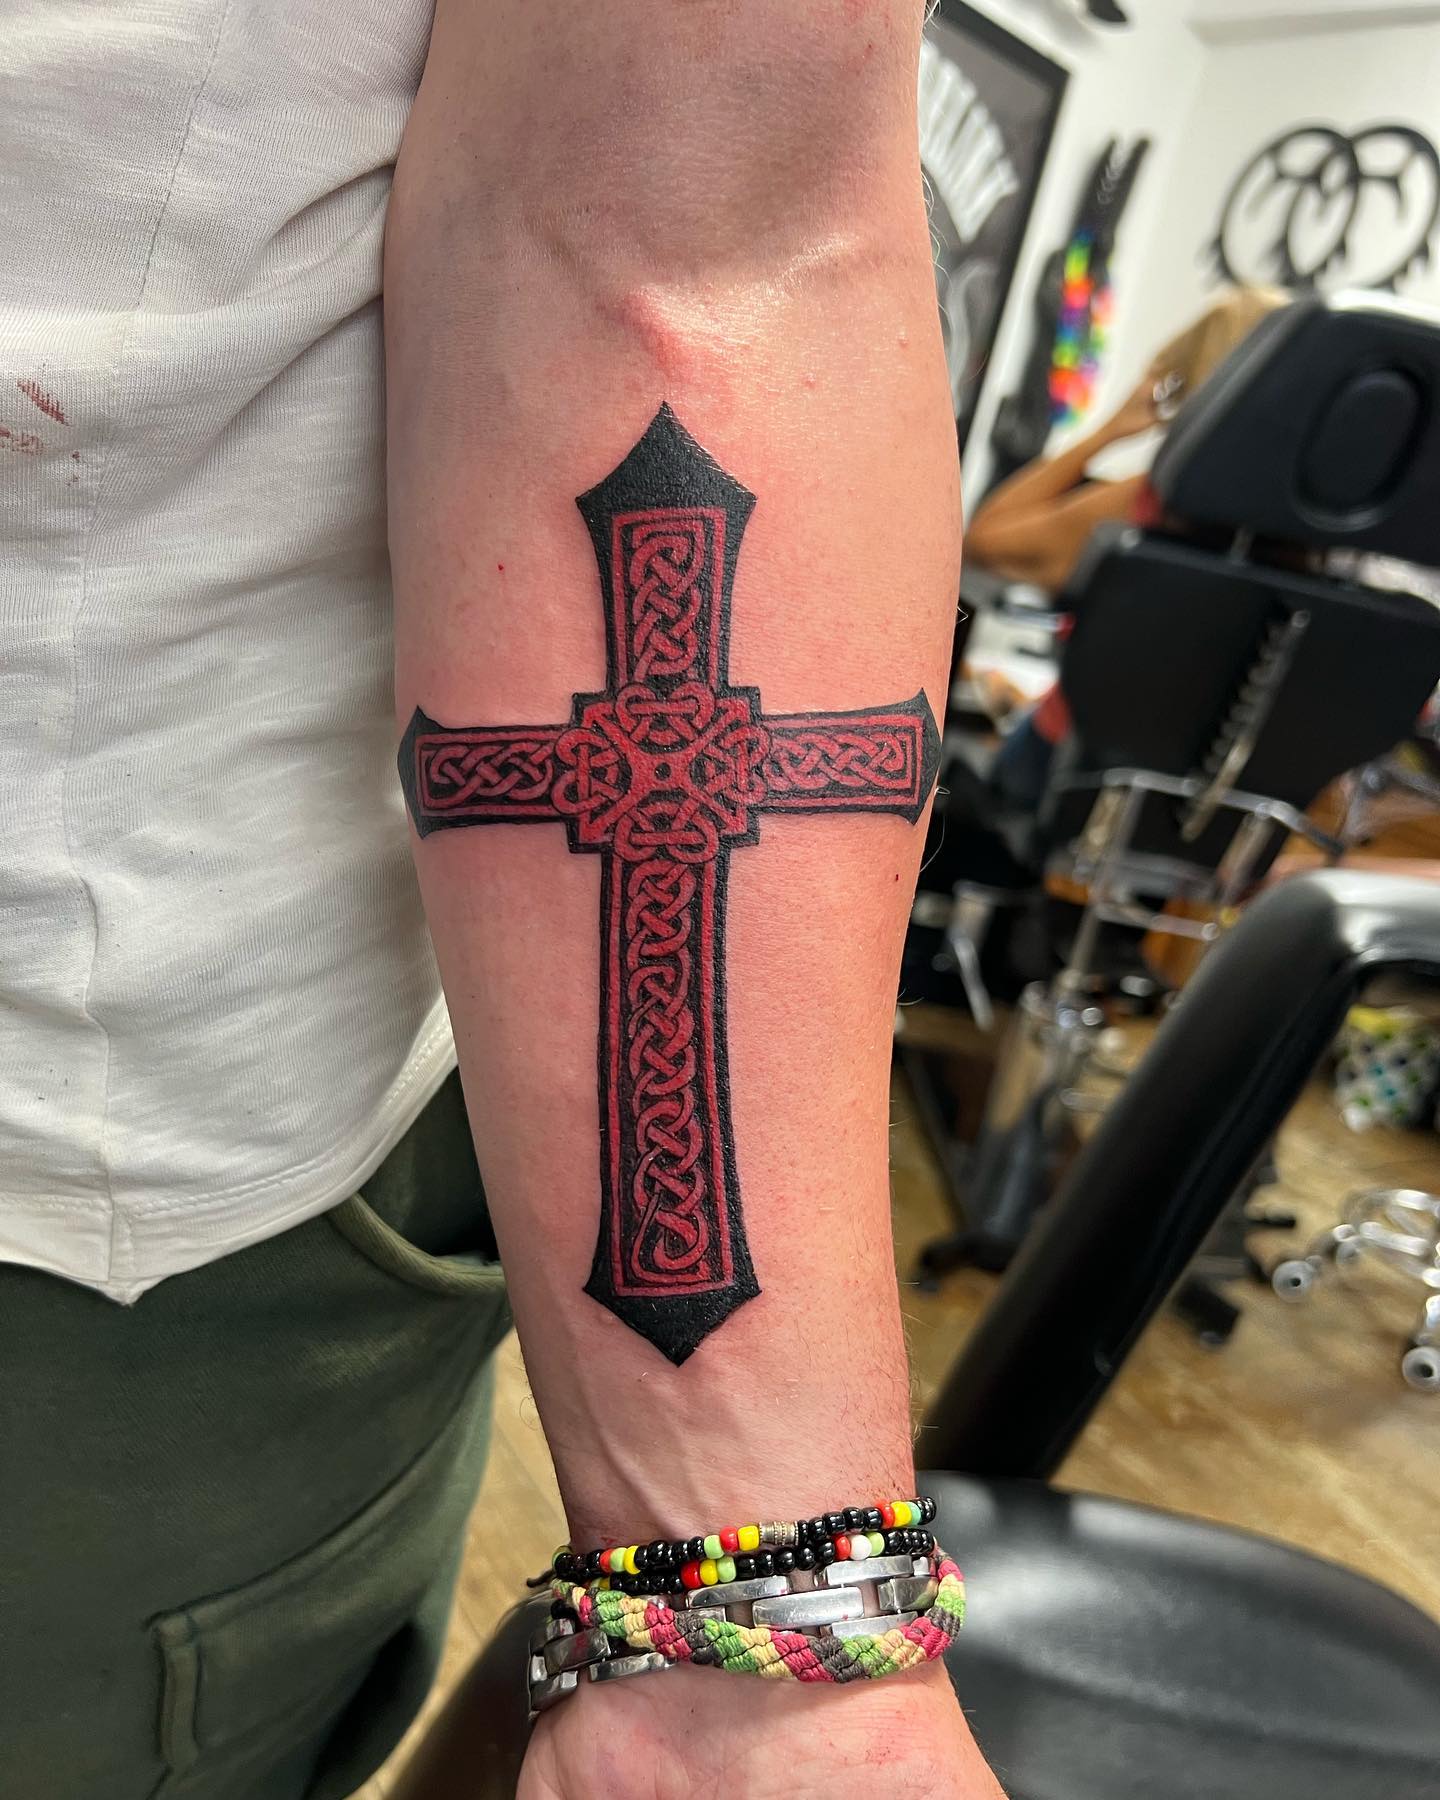 The Celtic Cross is a traditional cross which is created with a circle around the intersection of arms and stems. It has also powerful meanings such as strength and knowledge. Give this fabulous cross a shot.